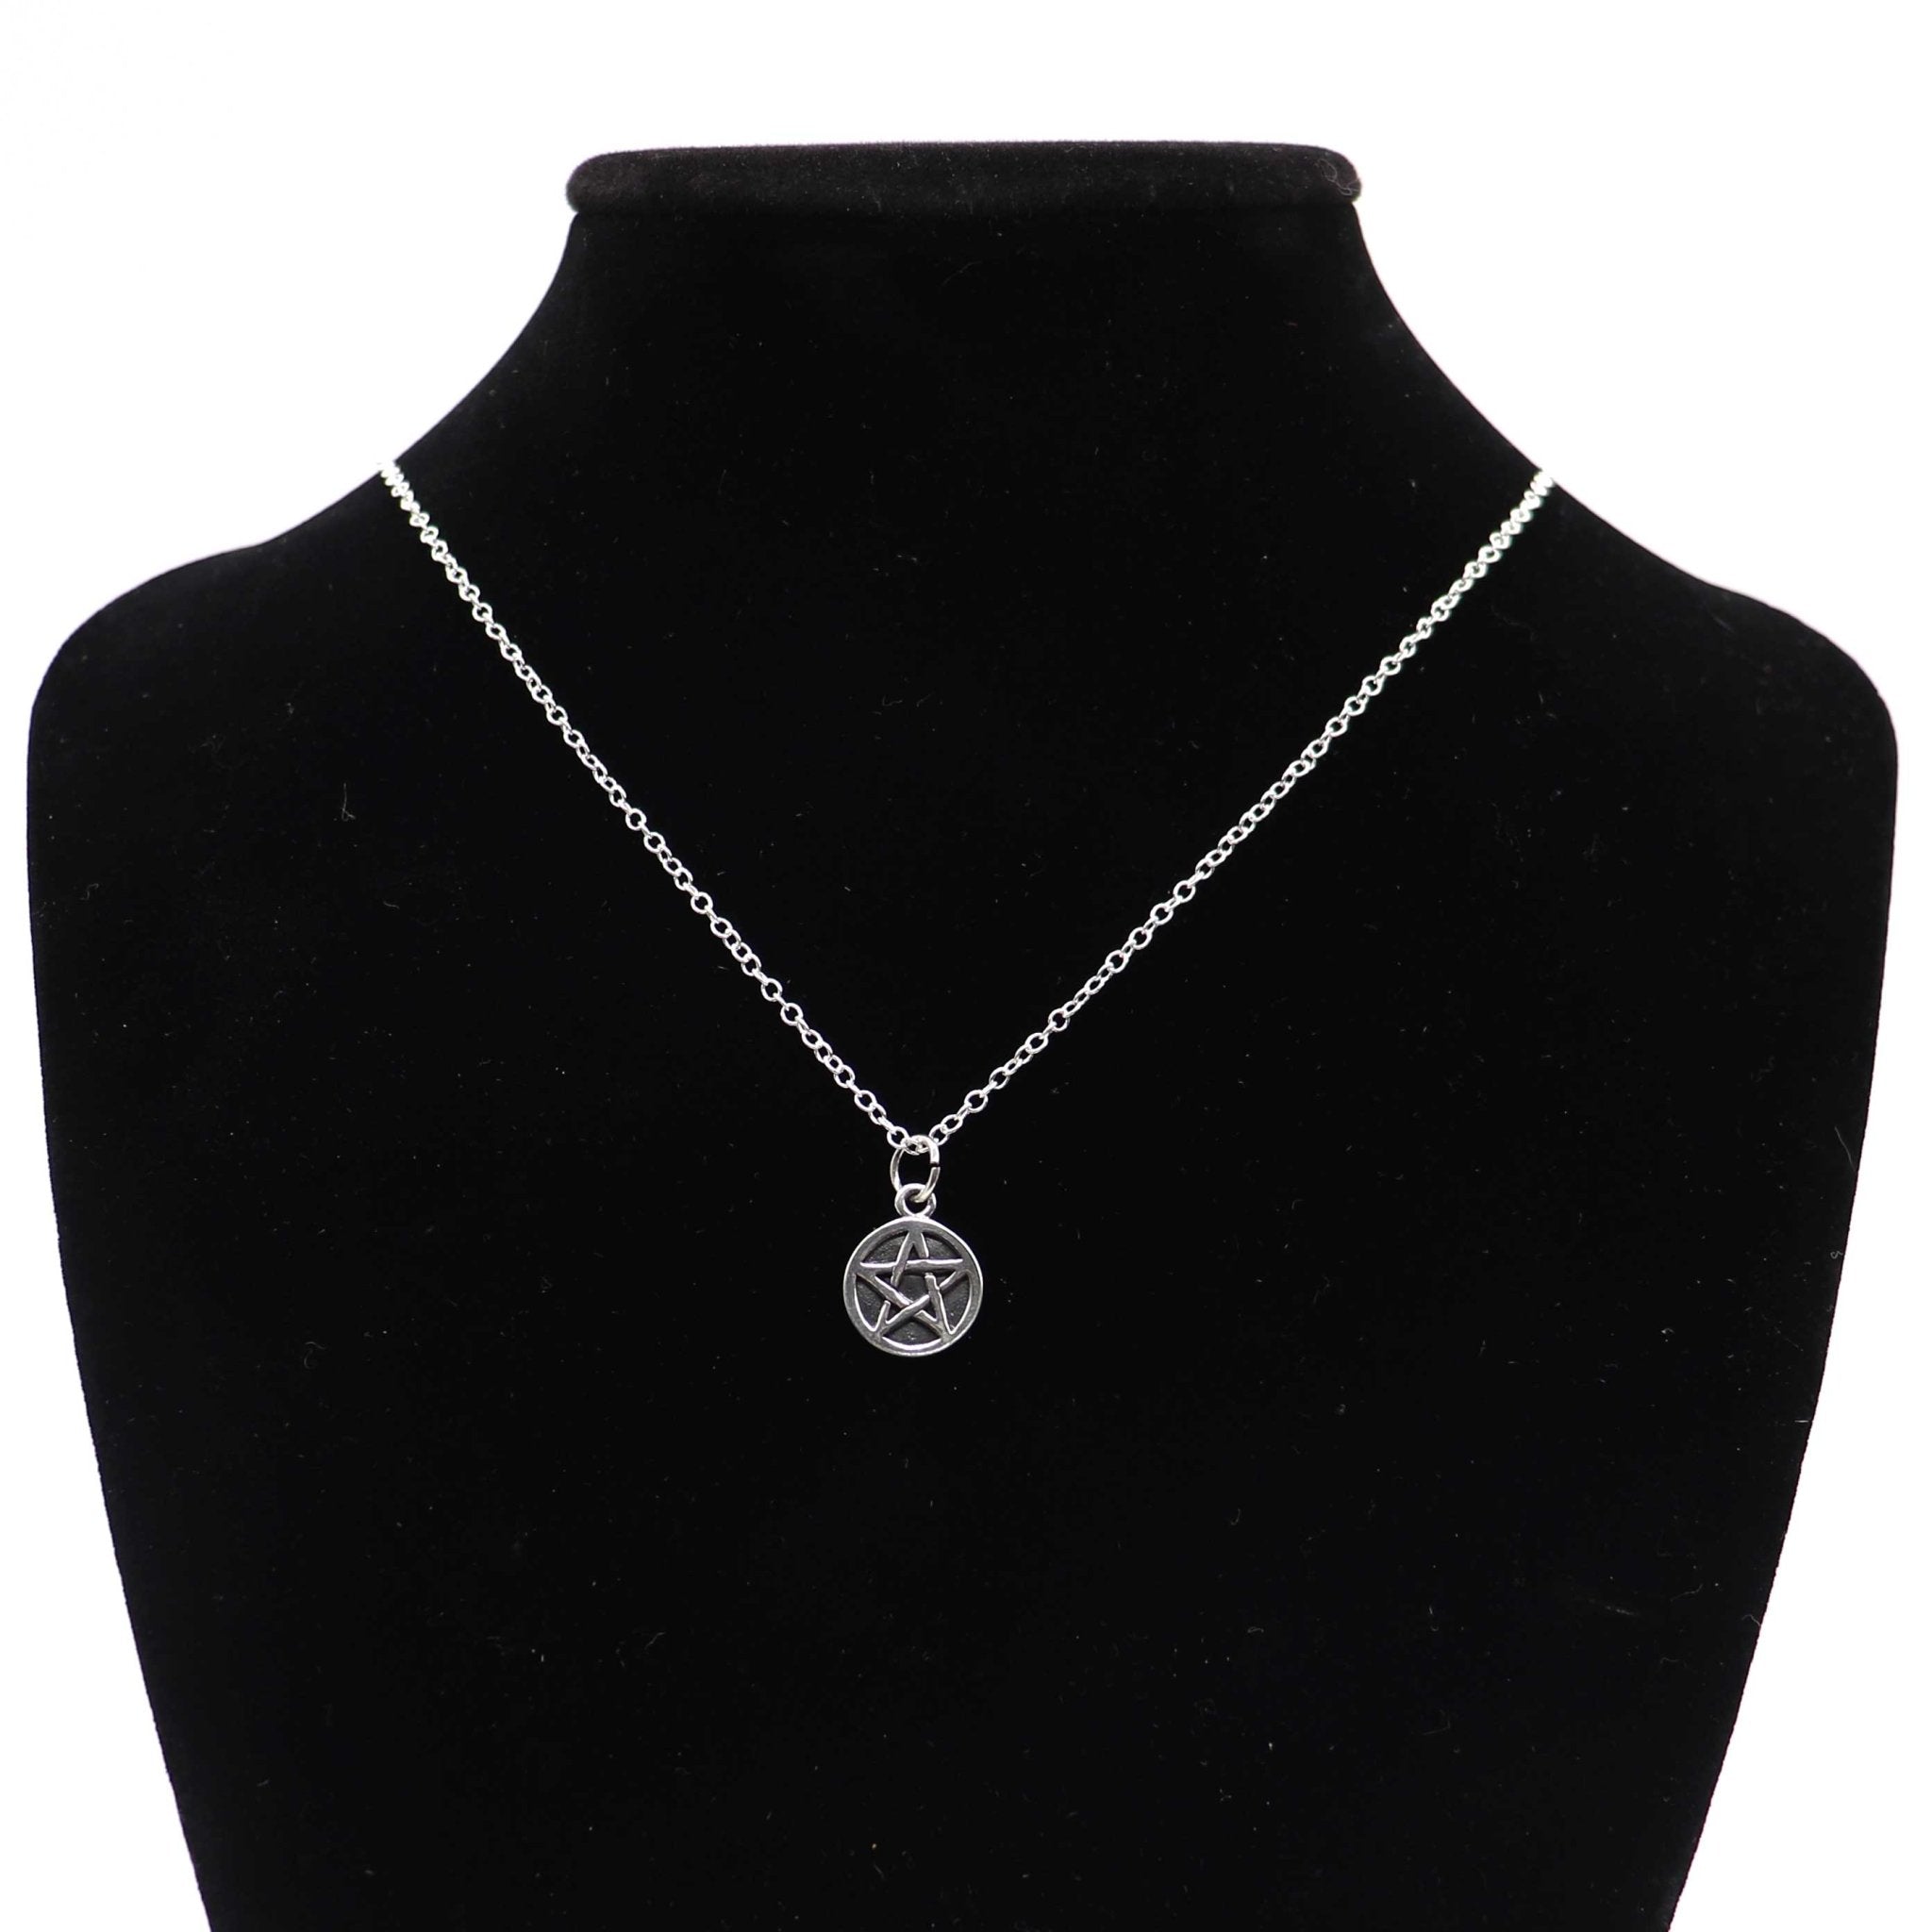 Pentacle Charm Necklace - 13 Moons